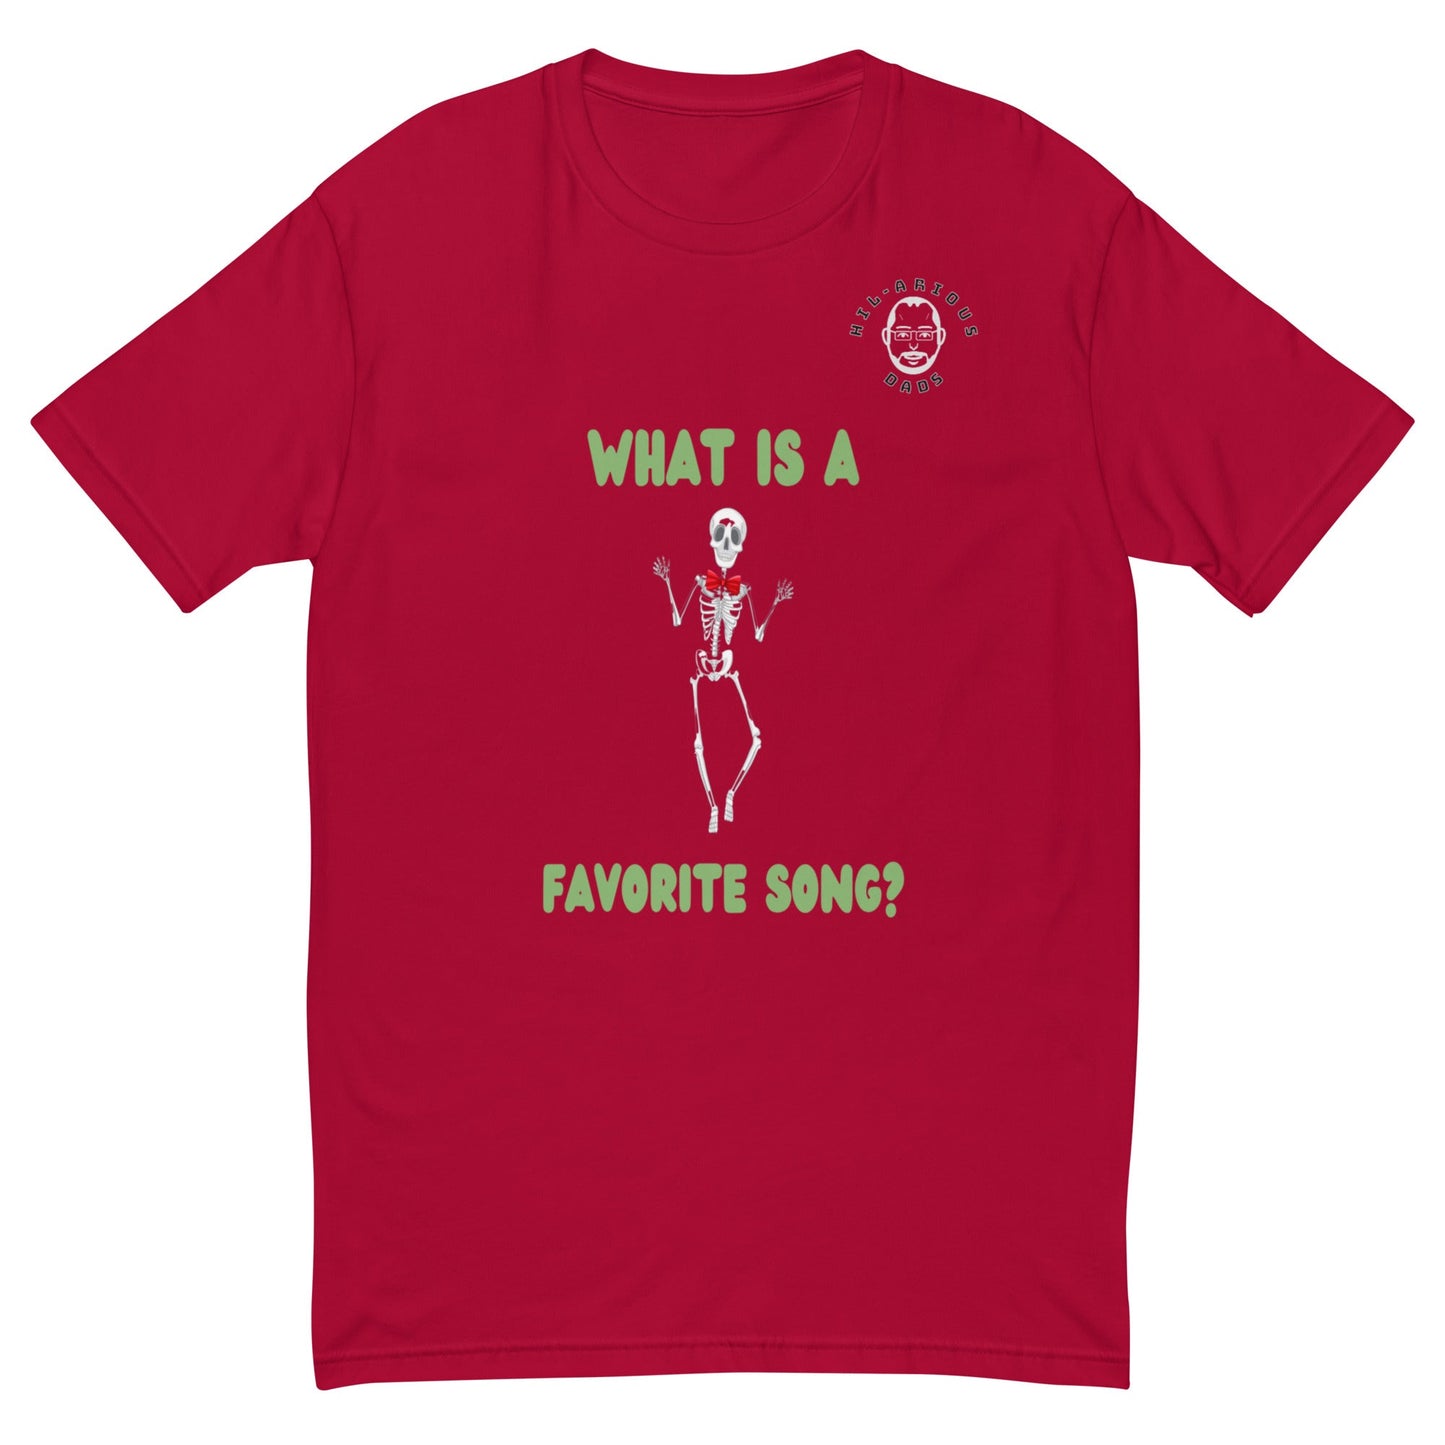 What is a skeleton favorite song?-T-shirt - Hil-arious Dads